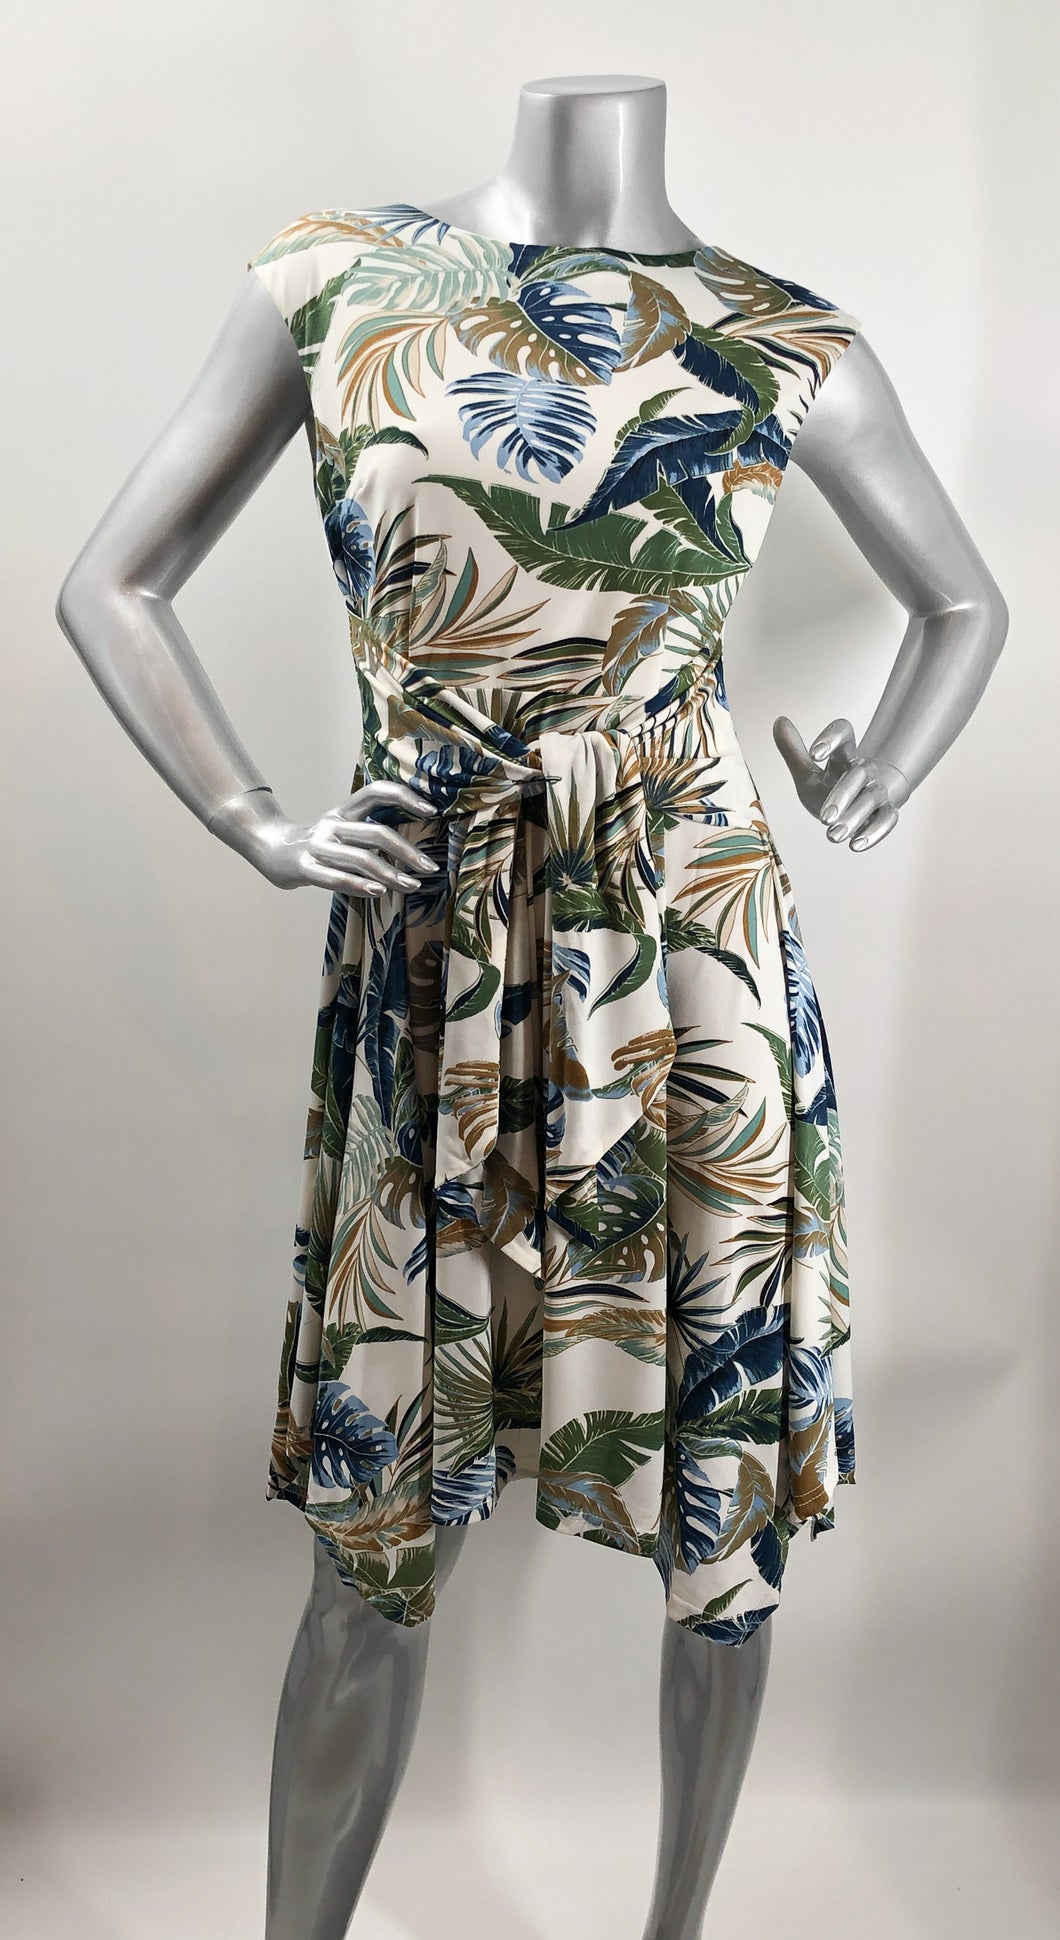 An absolutely gorgeous dress, our Winslow White Tropical dress drapes beautifully and is figure flattering.  A white background comes alive with a tropical fern print and is enhanced with a gorgeous, attached tie that can be tied in the front or back.  Worn to lunch or a night out.  This gorgeous summer dress will make a fashion statement.  